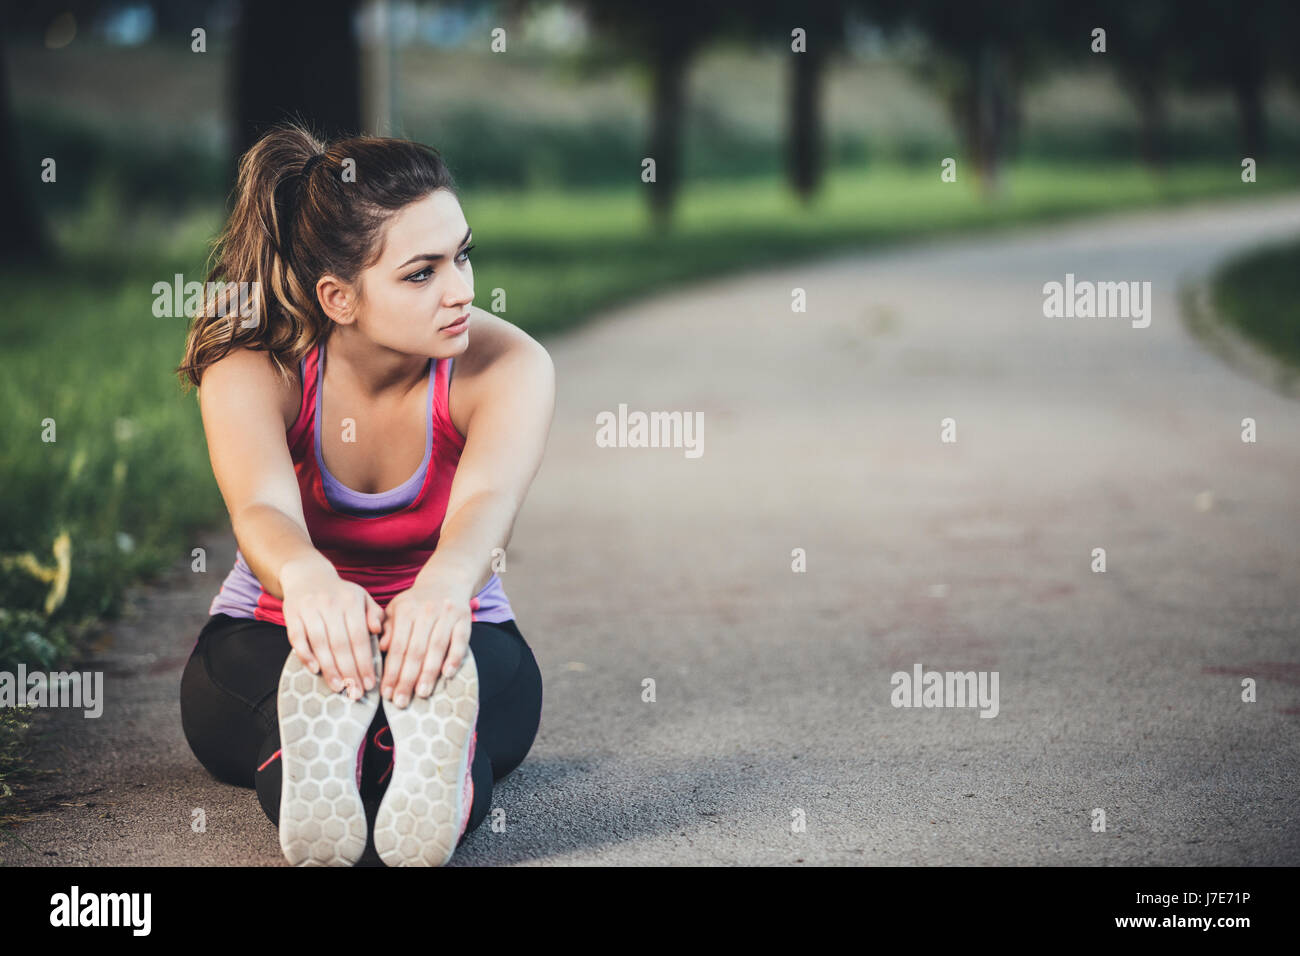 Woman is stretching before jogging. Fitness and lifestyle concept. Stock Photo